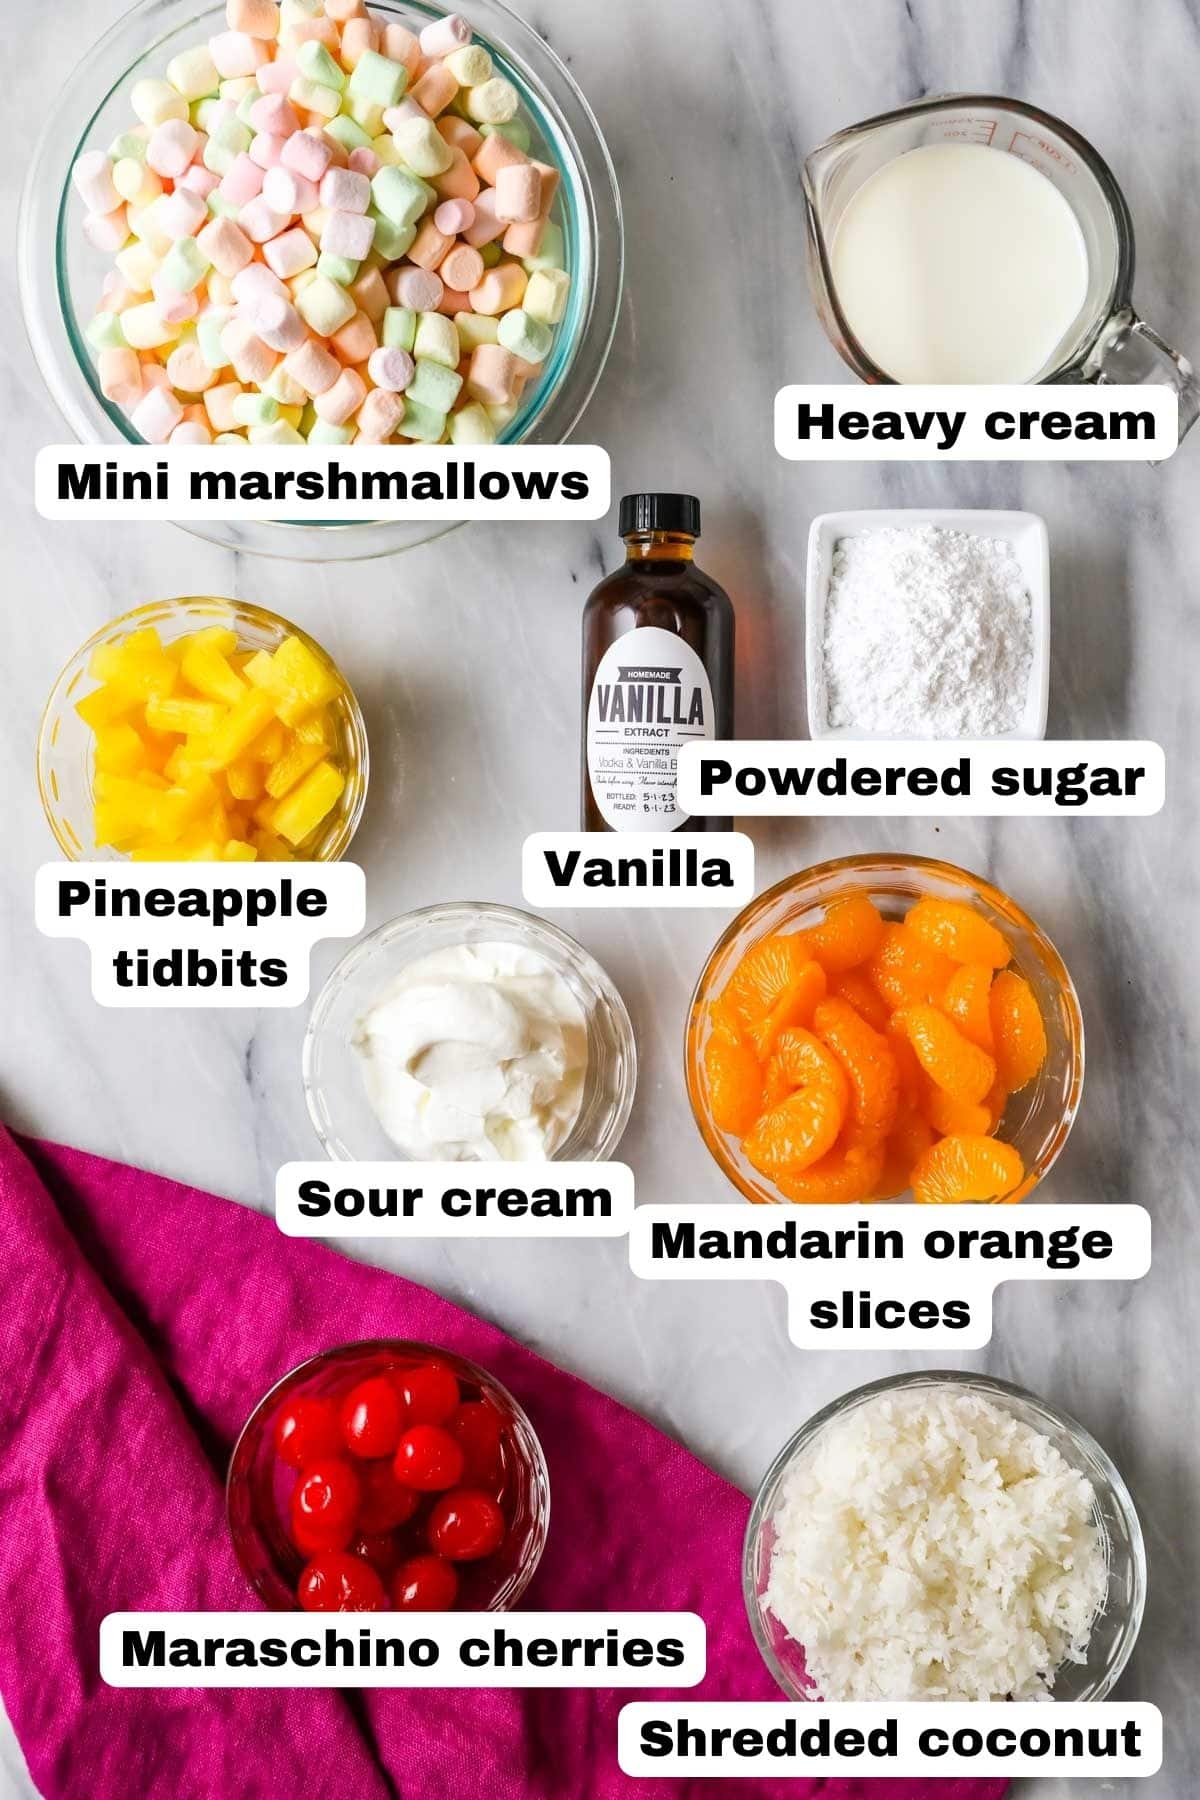 Overhead view of labeled ingredients including mini marshmallows, canned fruit, heavy cream, and more.